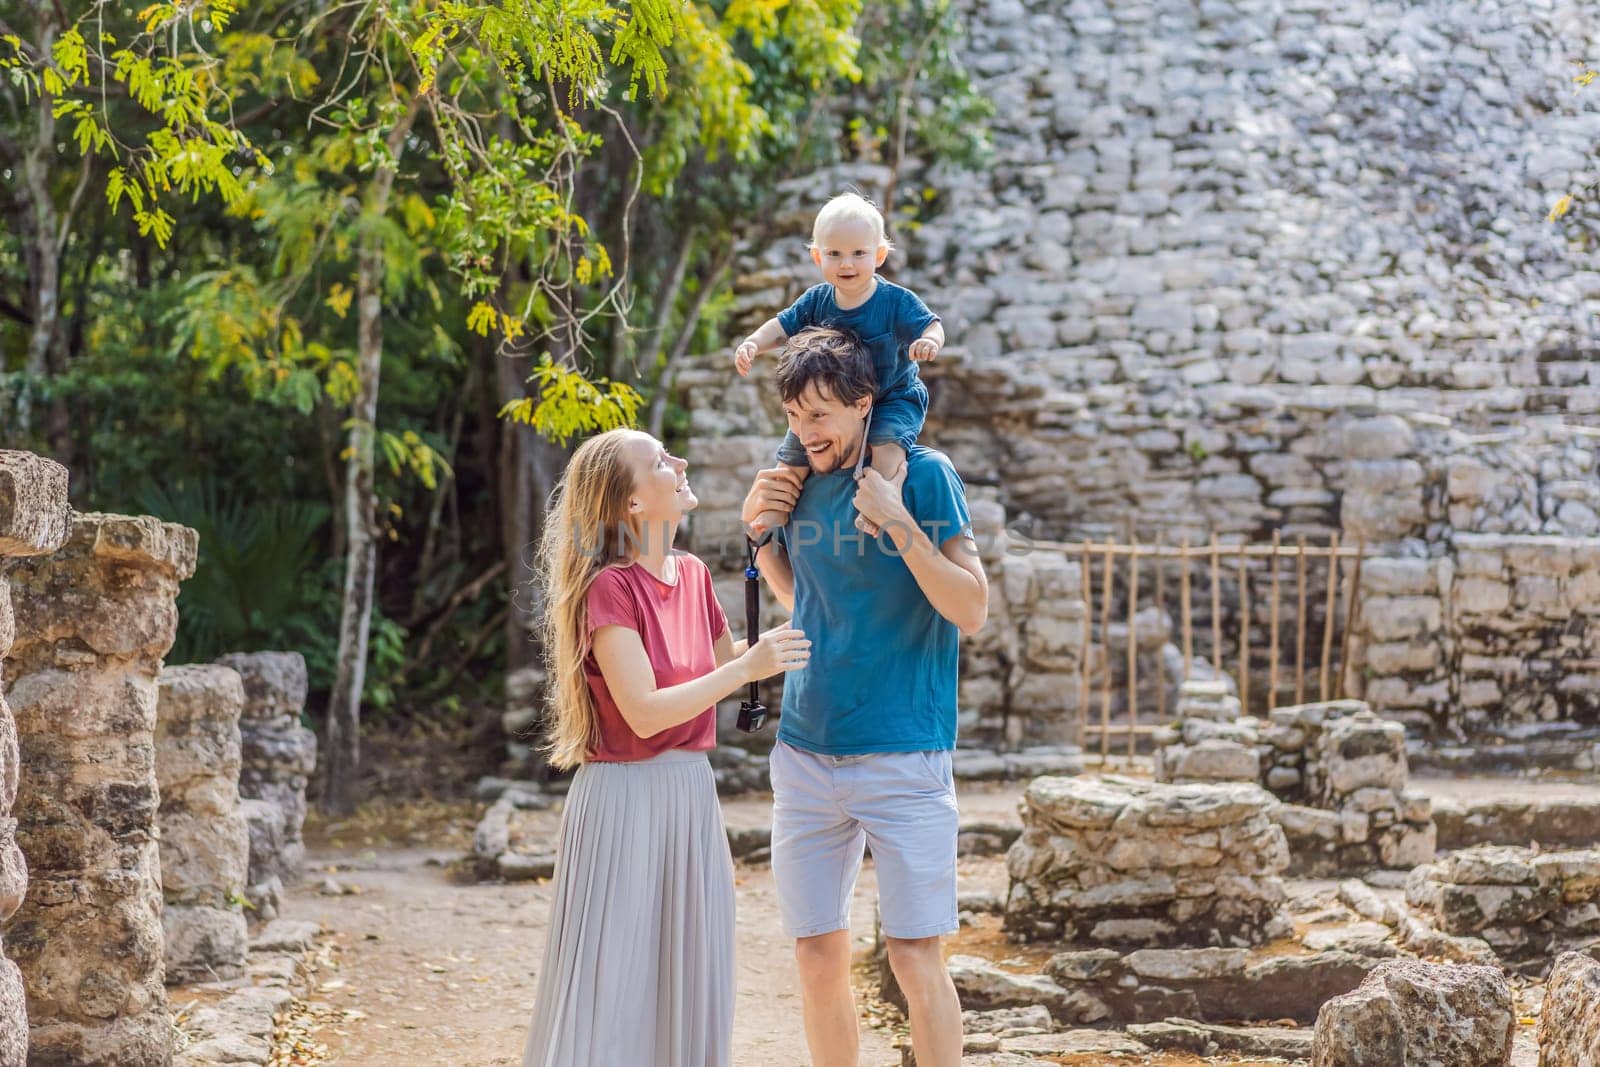 Mom, dad and baby tourists at Coba, Mexico. Ancient mayan city in Mexico. Coba is an archaeological area and a famous landmark of Yucatan Peninsula. Cloudy sky over a pyramid in Mexico.